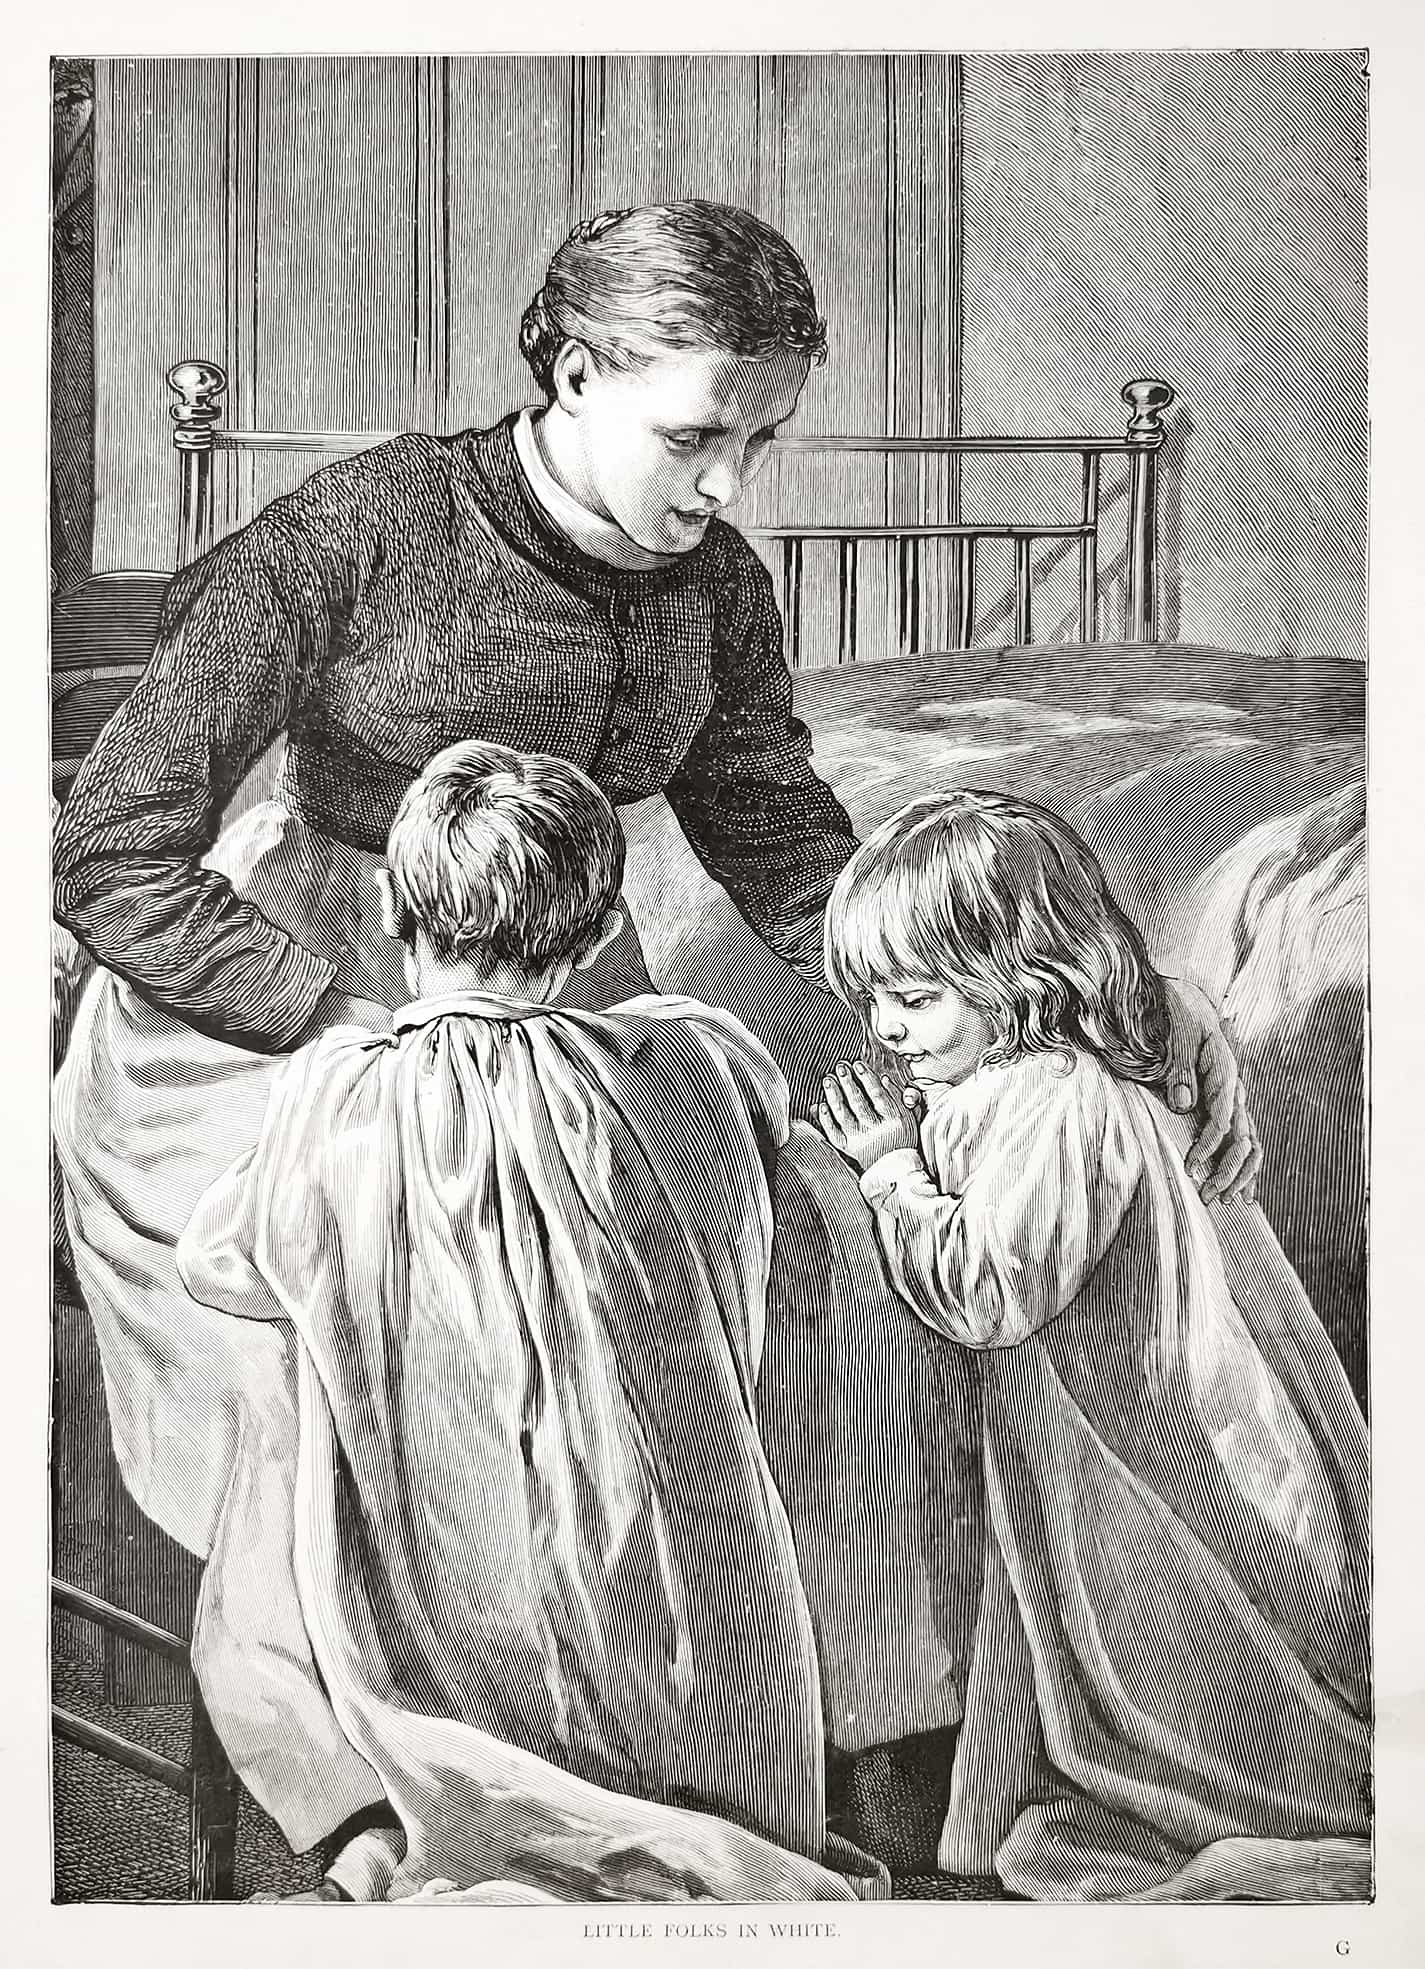 Little folks in white. - Antique Print from 1895